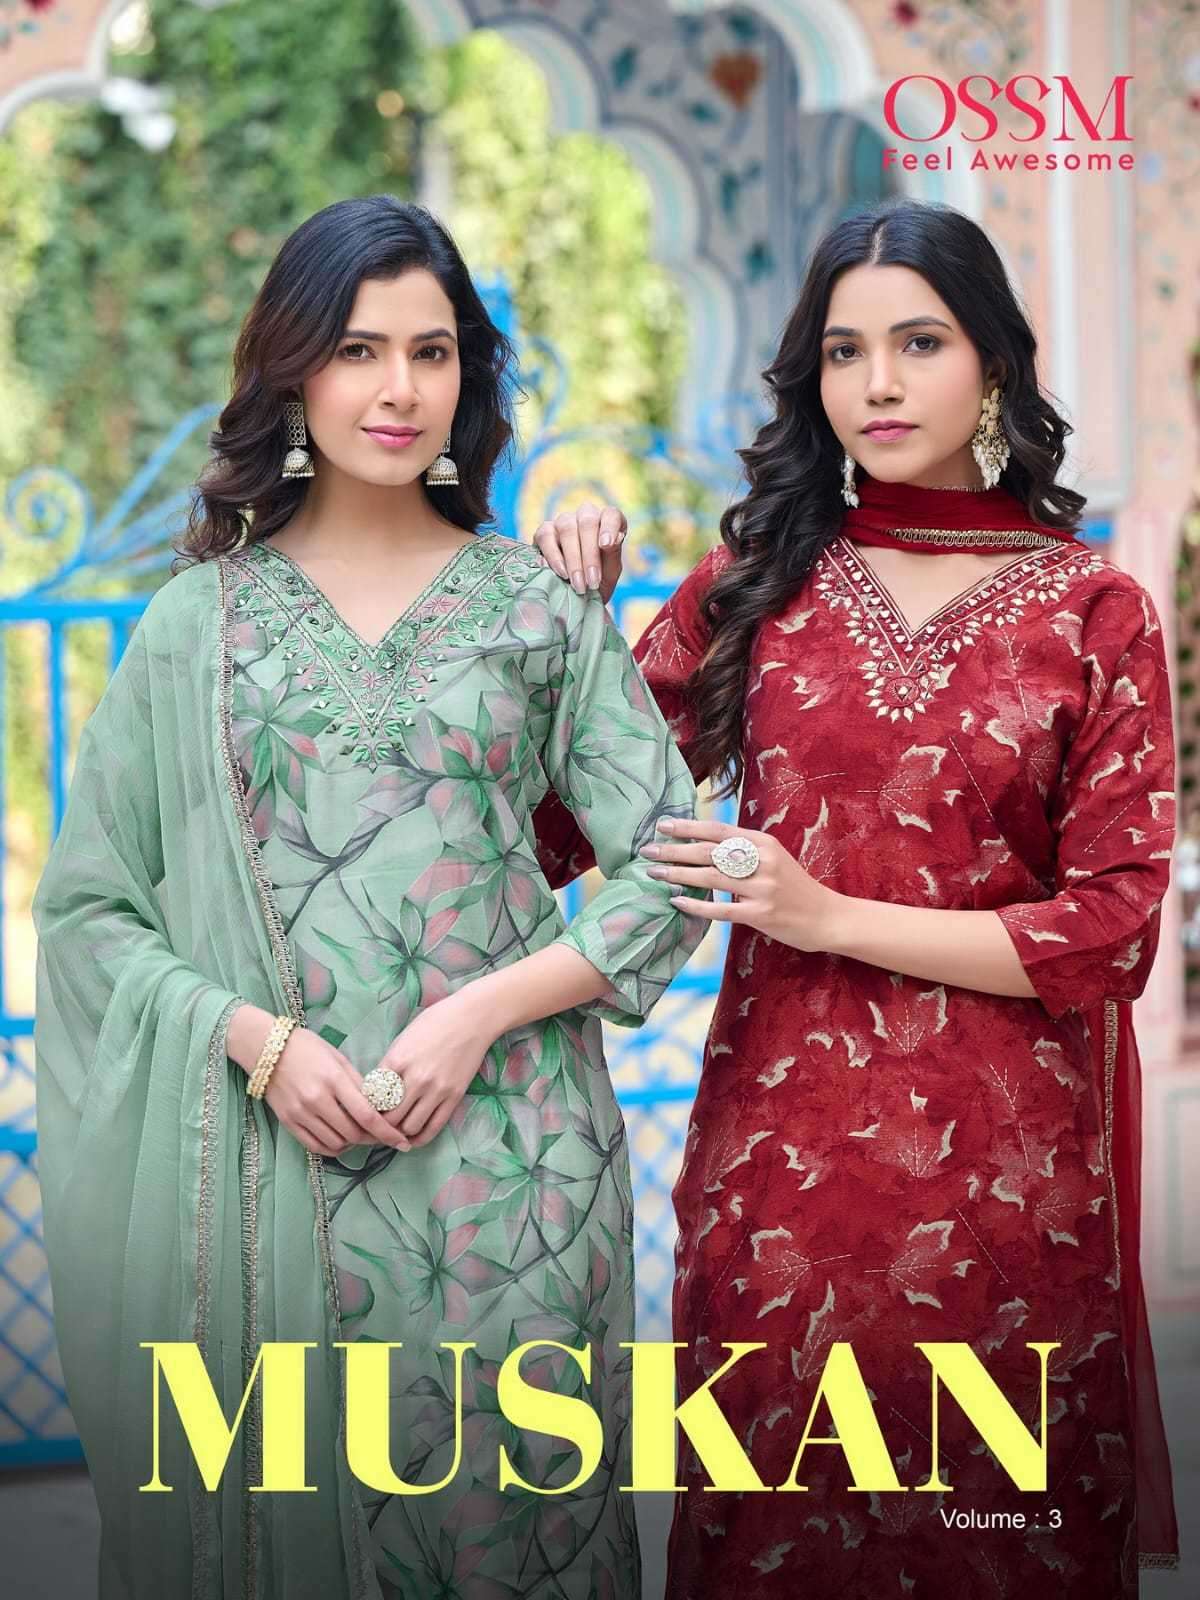 ossm muskan vol 3 CHANDERI SILK WITH READYMADE SUITS COLLECT...